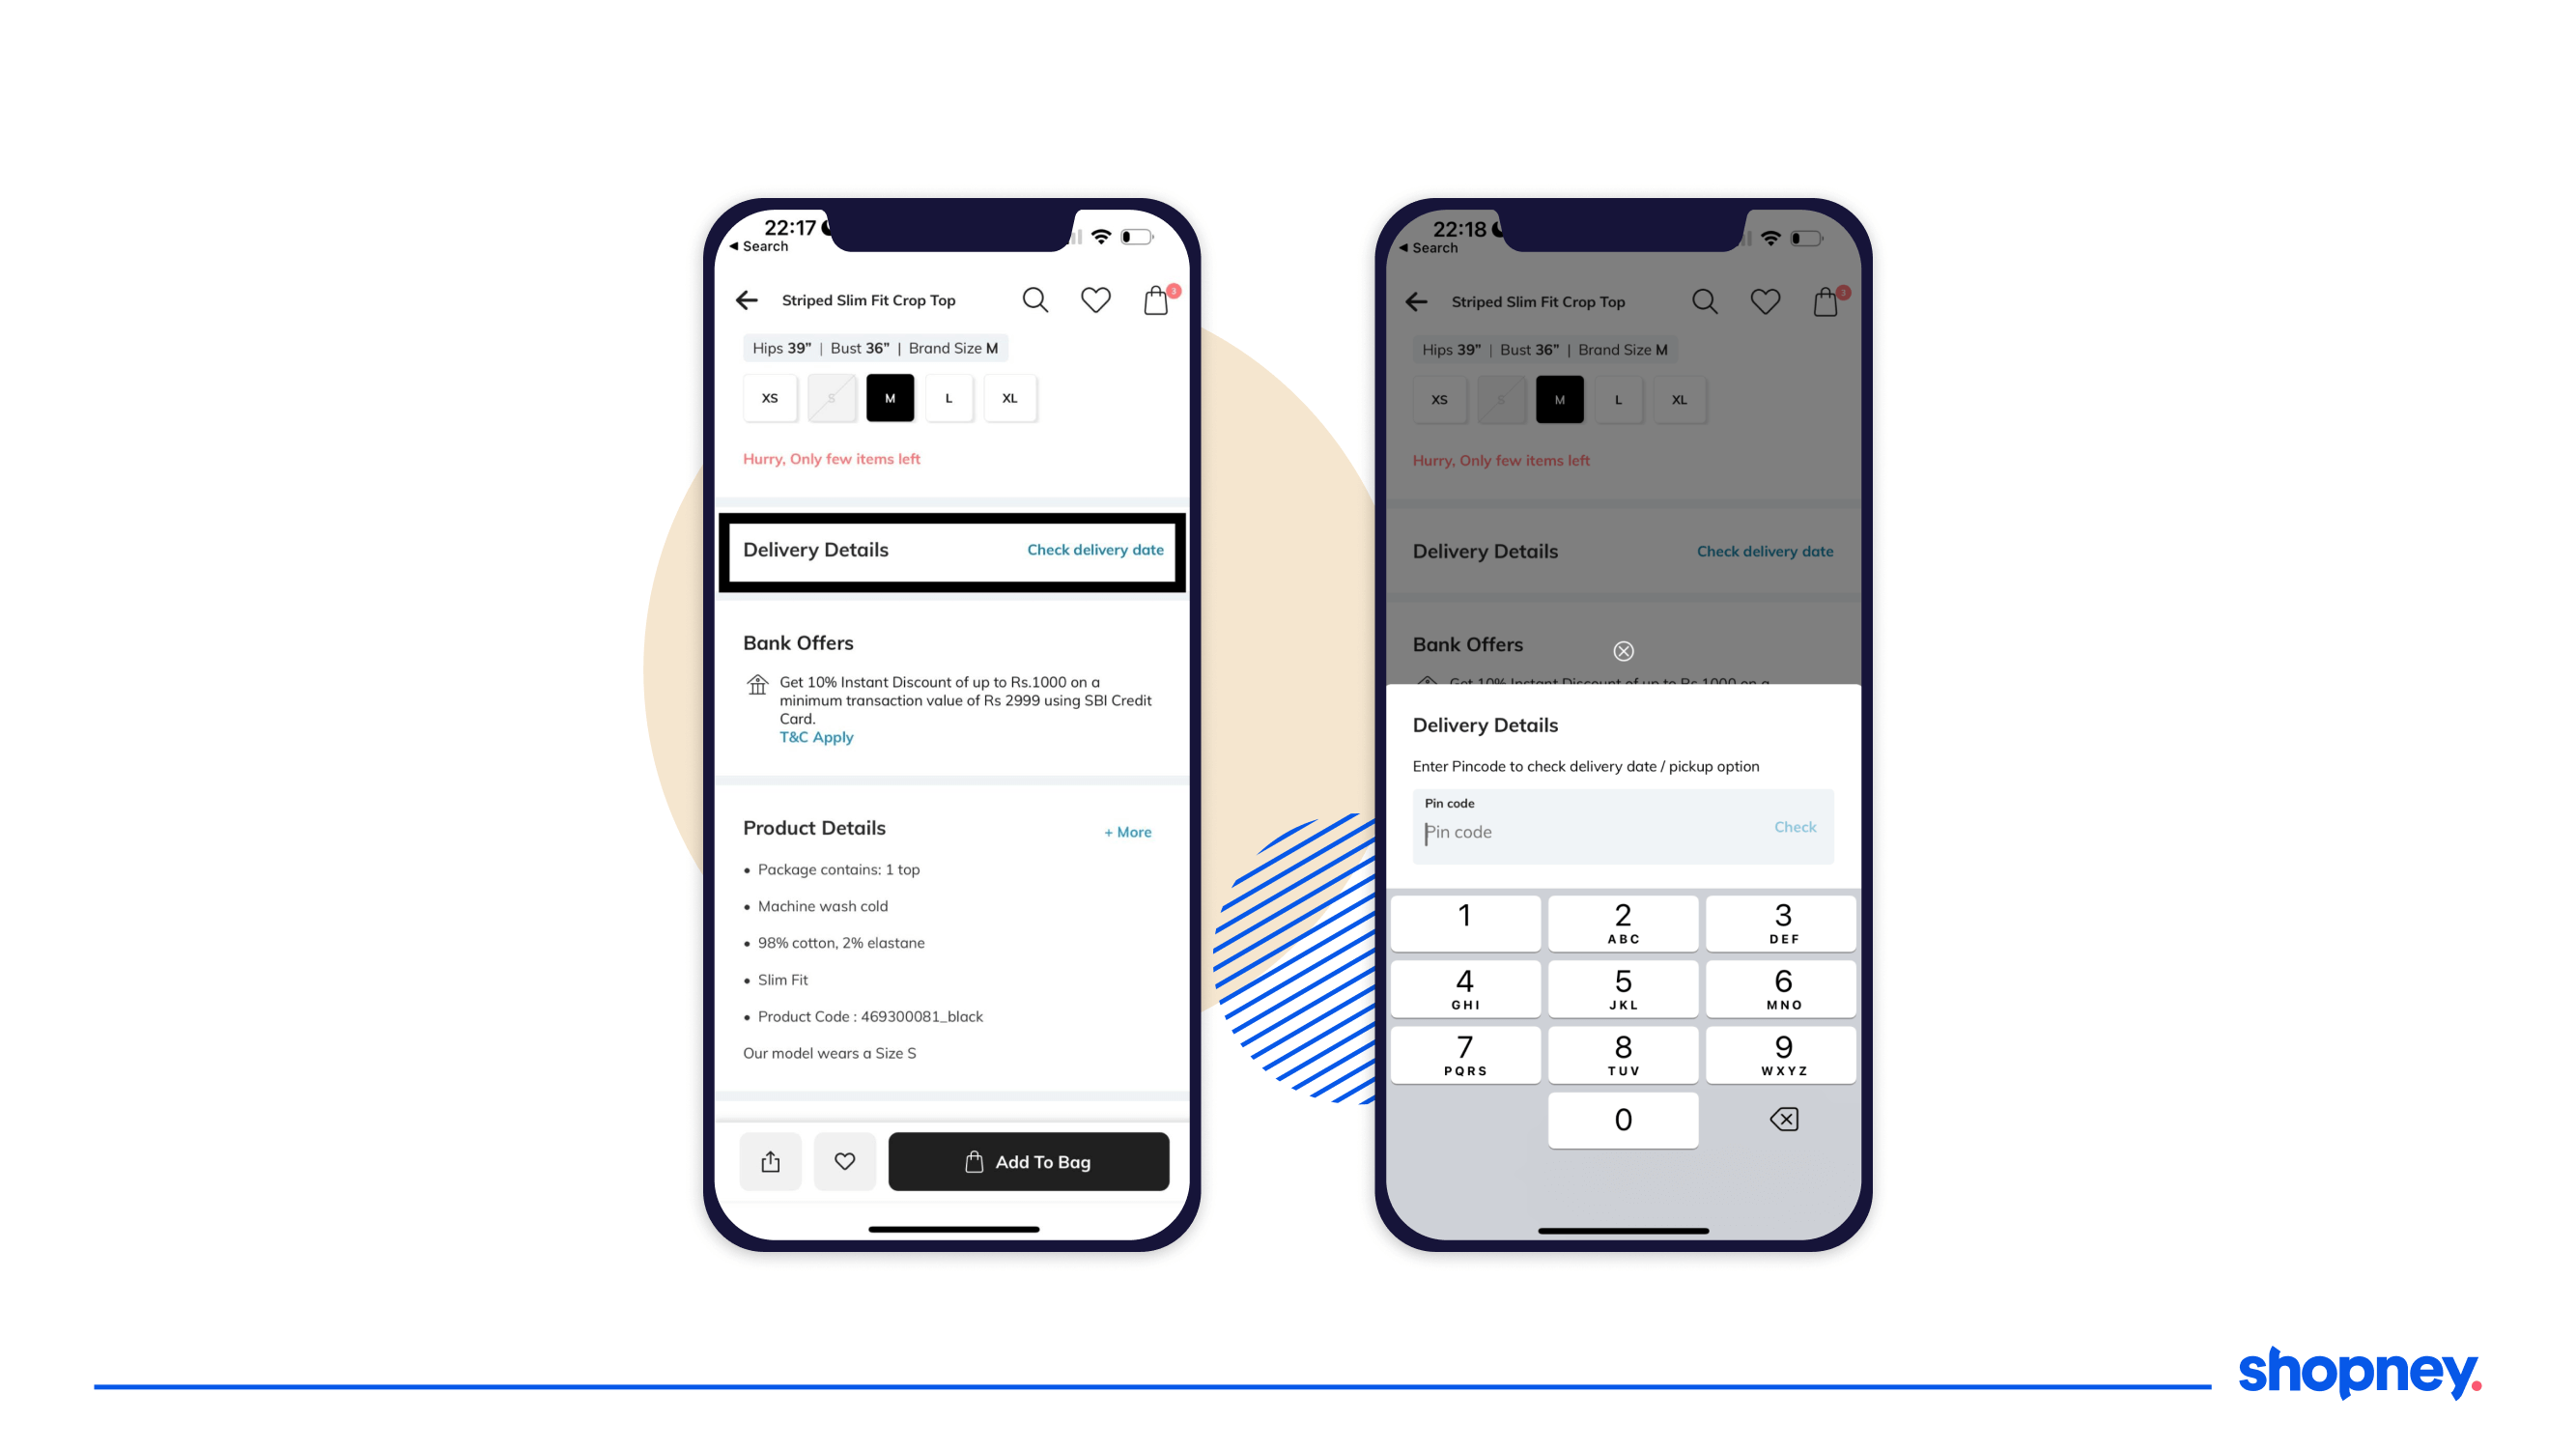 Delivery date checker on mobile app